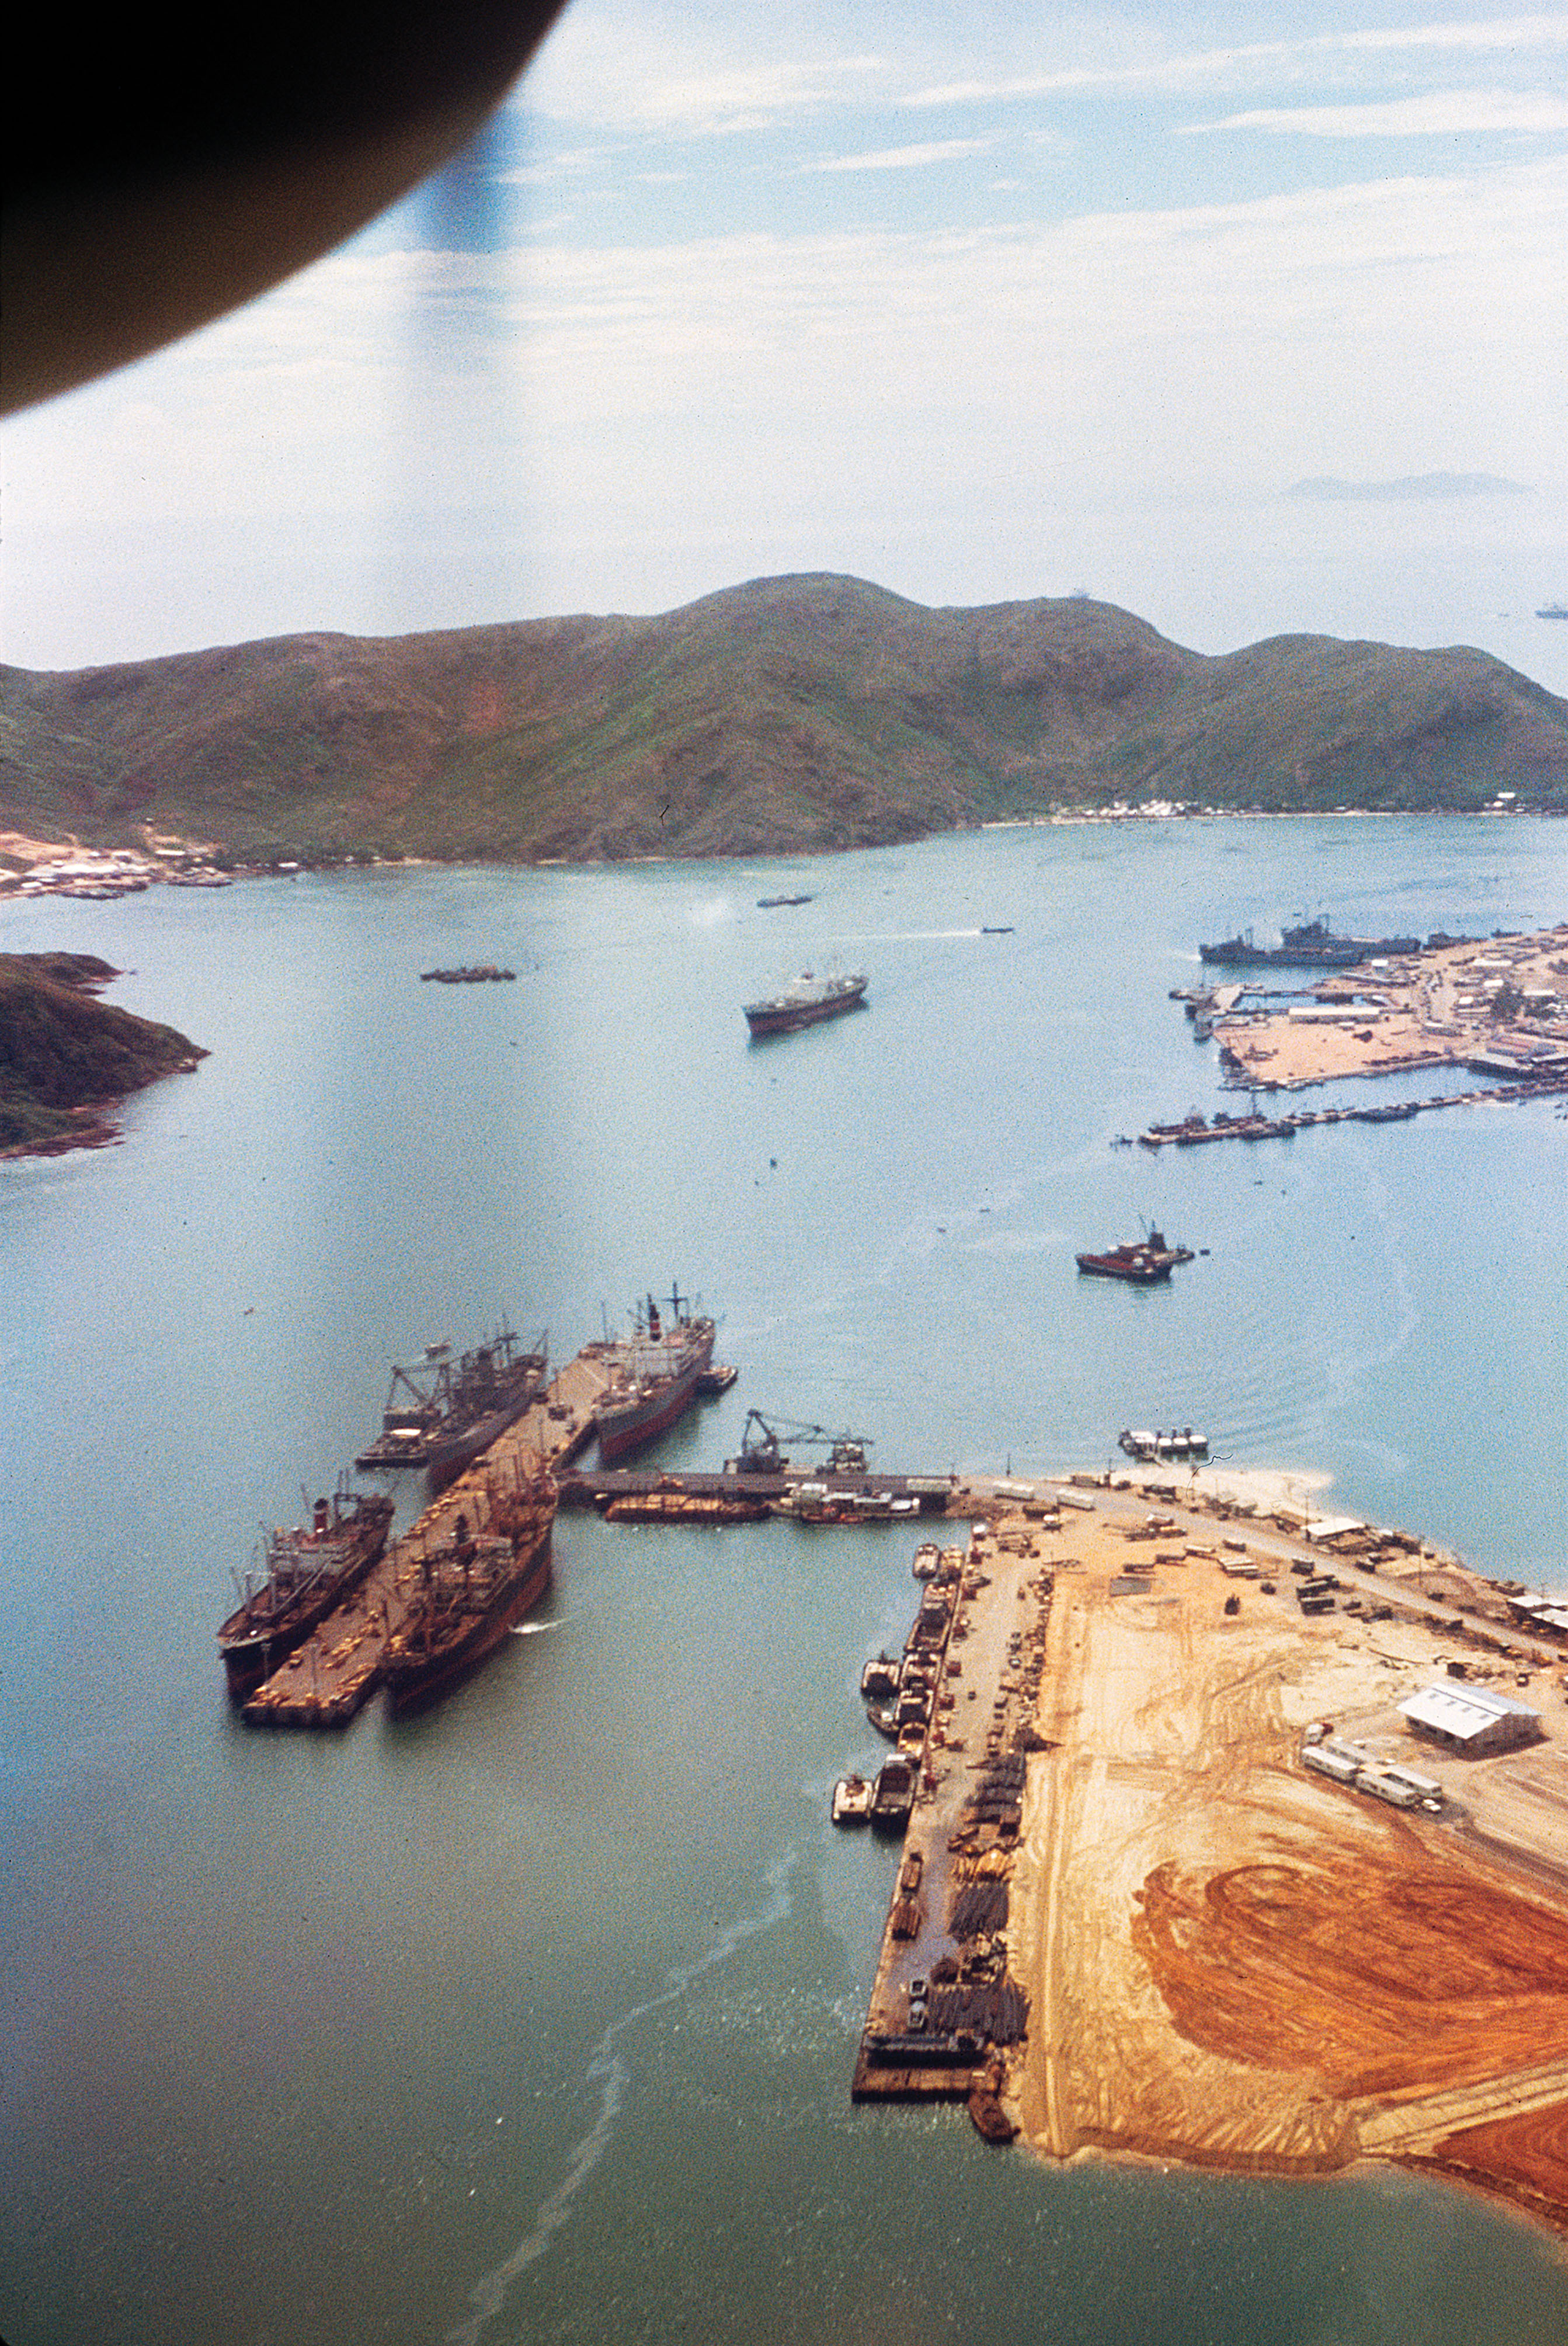 The harbor at Cam Ranh Bay c. 1967. The harbor was a major supply center for U.S. and allied troops. Heavy damage there would have severely hindered military operations. / AWM P02060.07